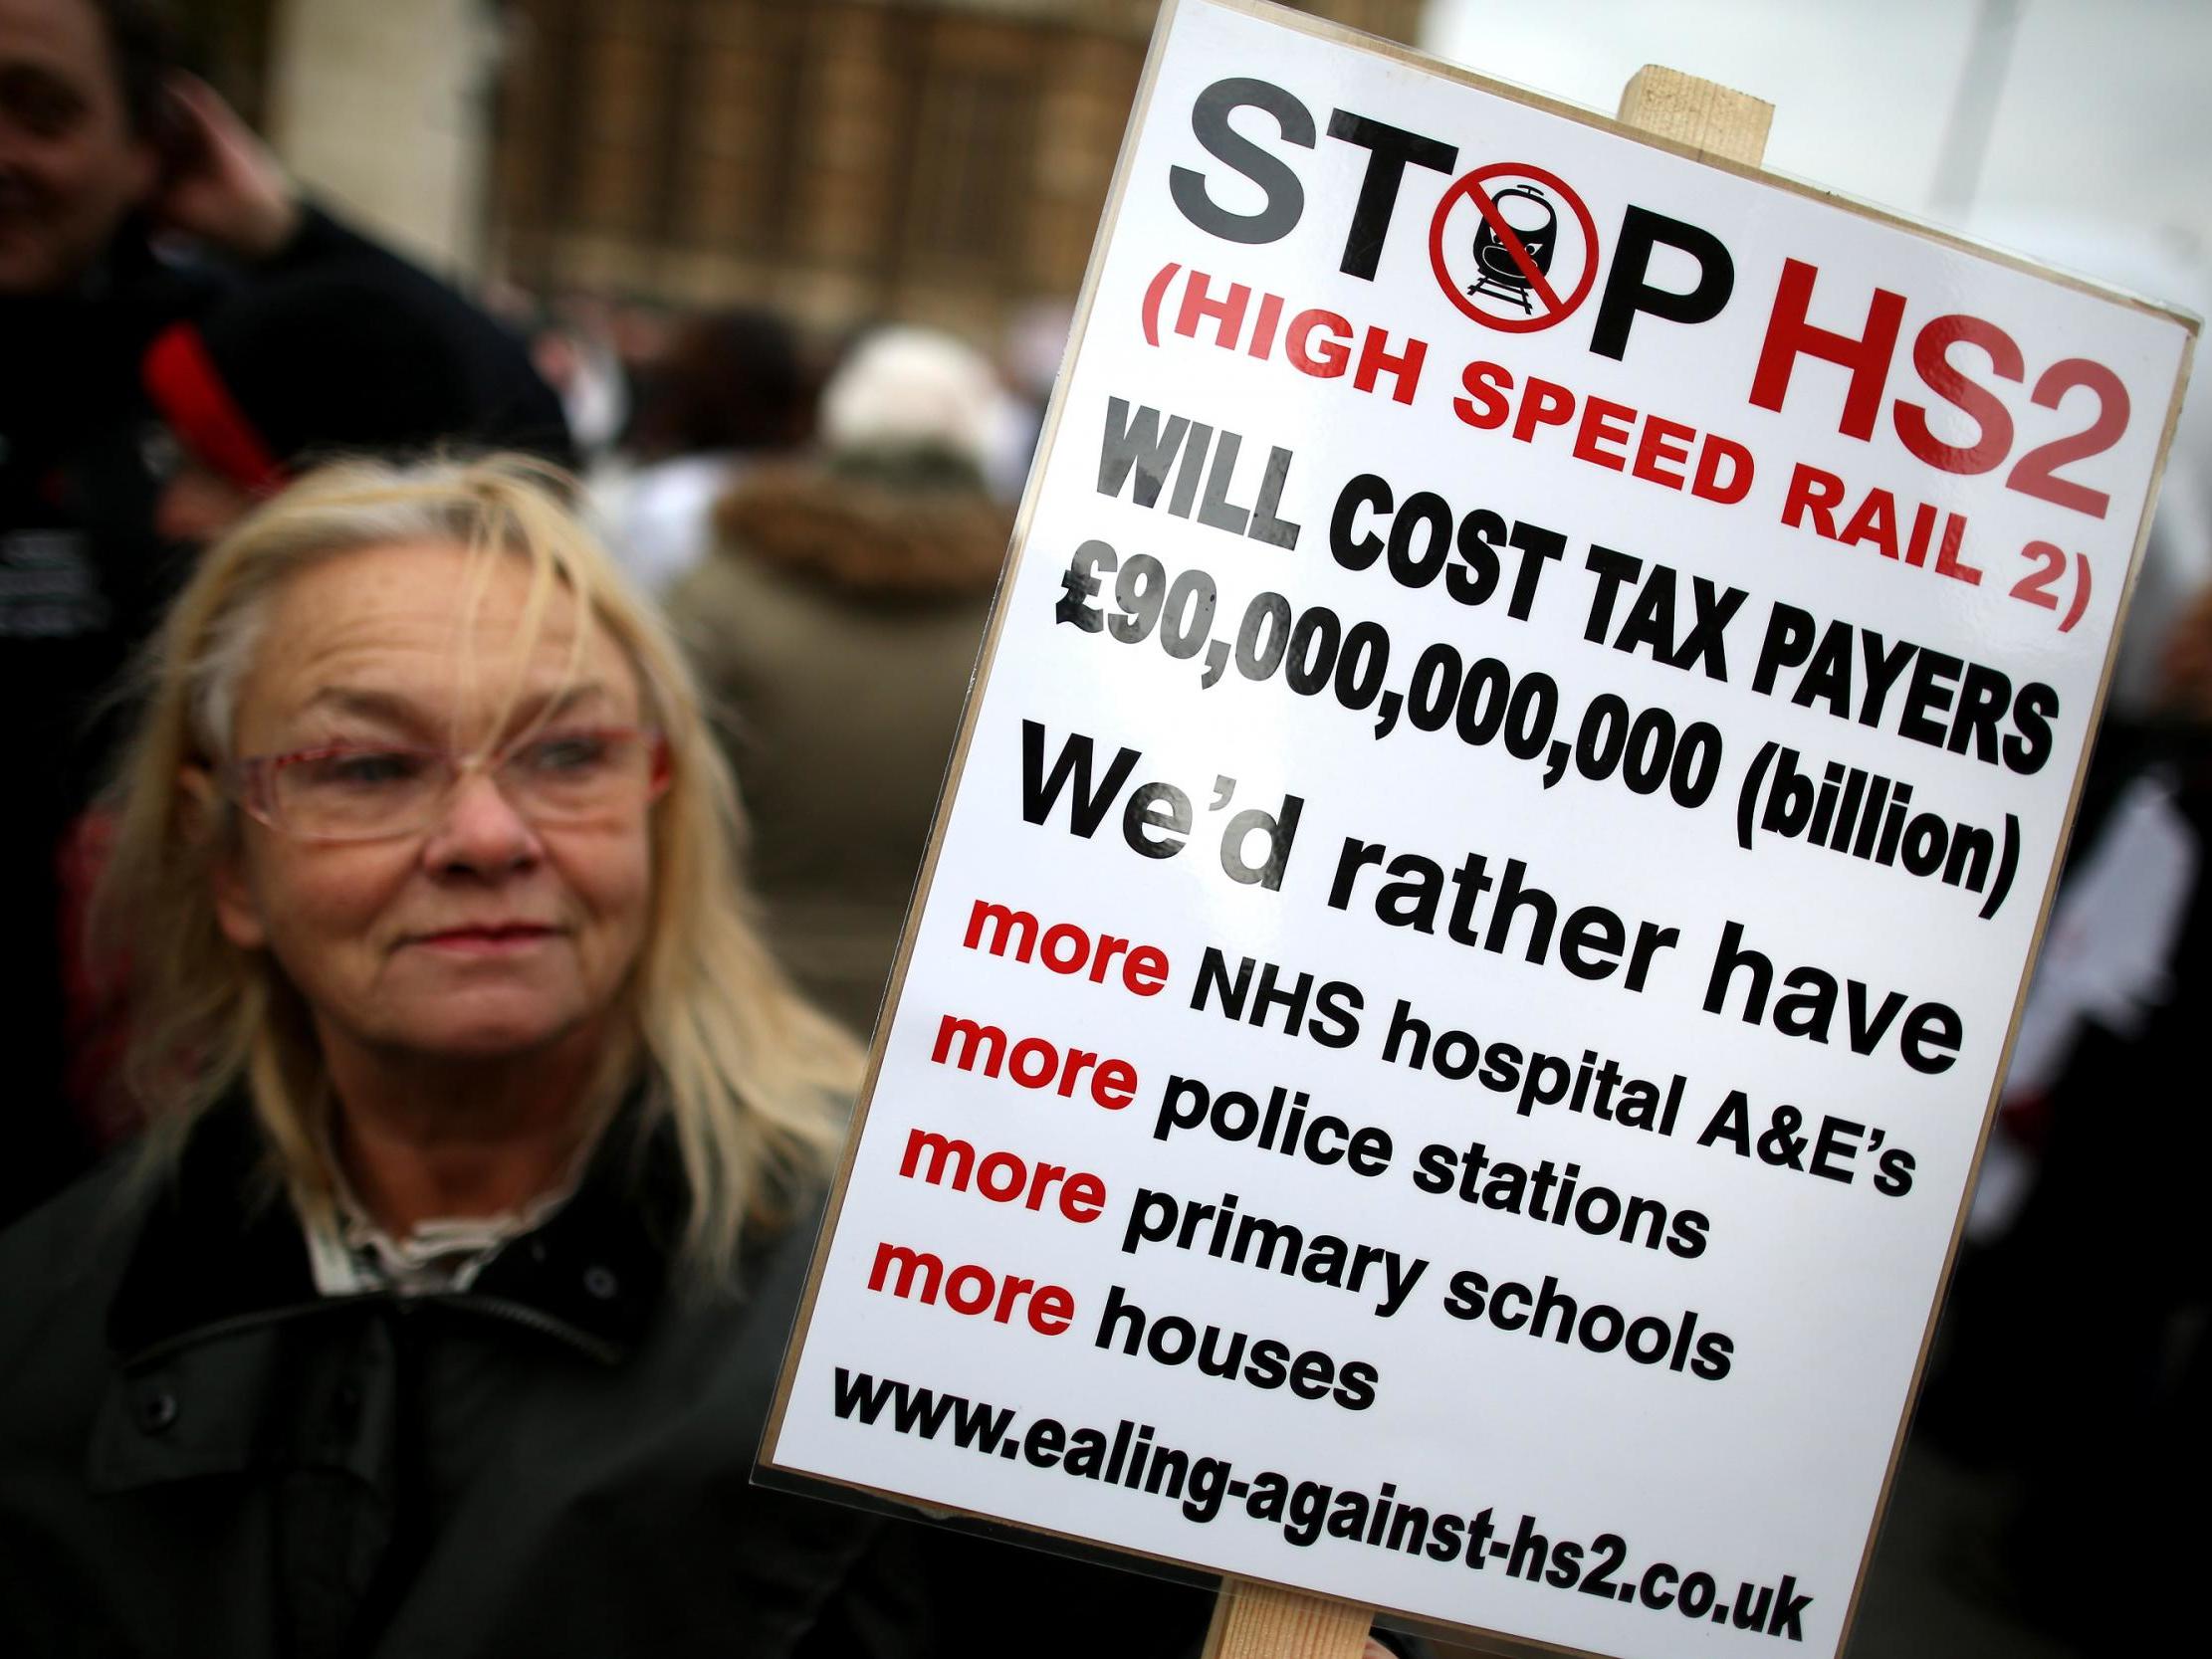 A protester at a Stop HS2 march (Getty)